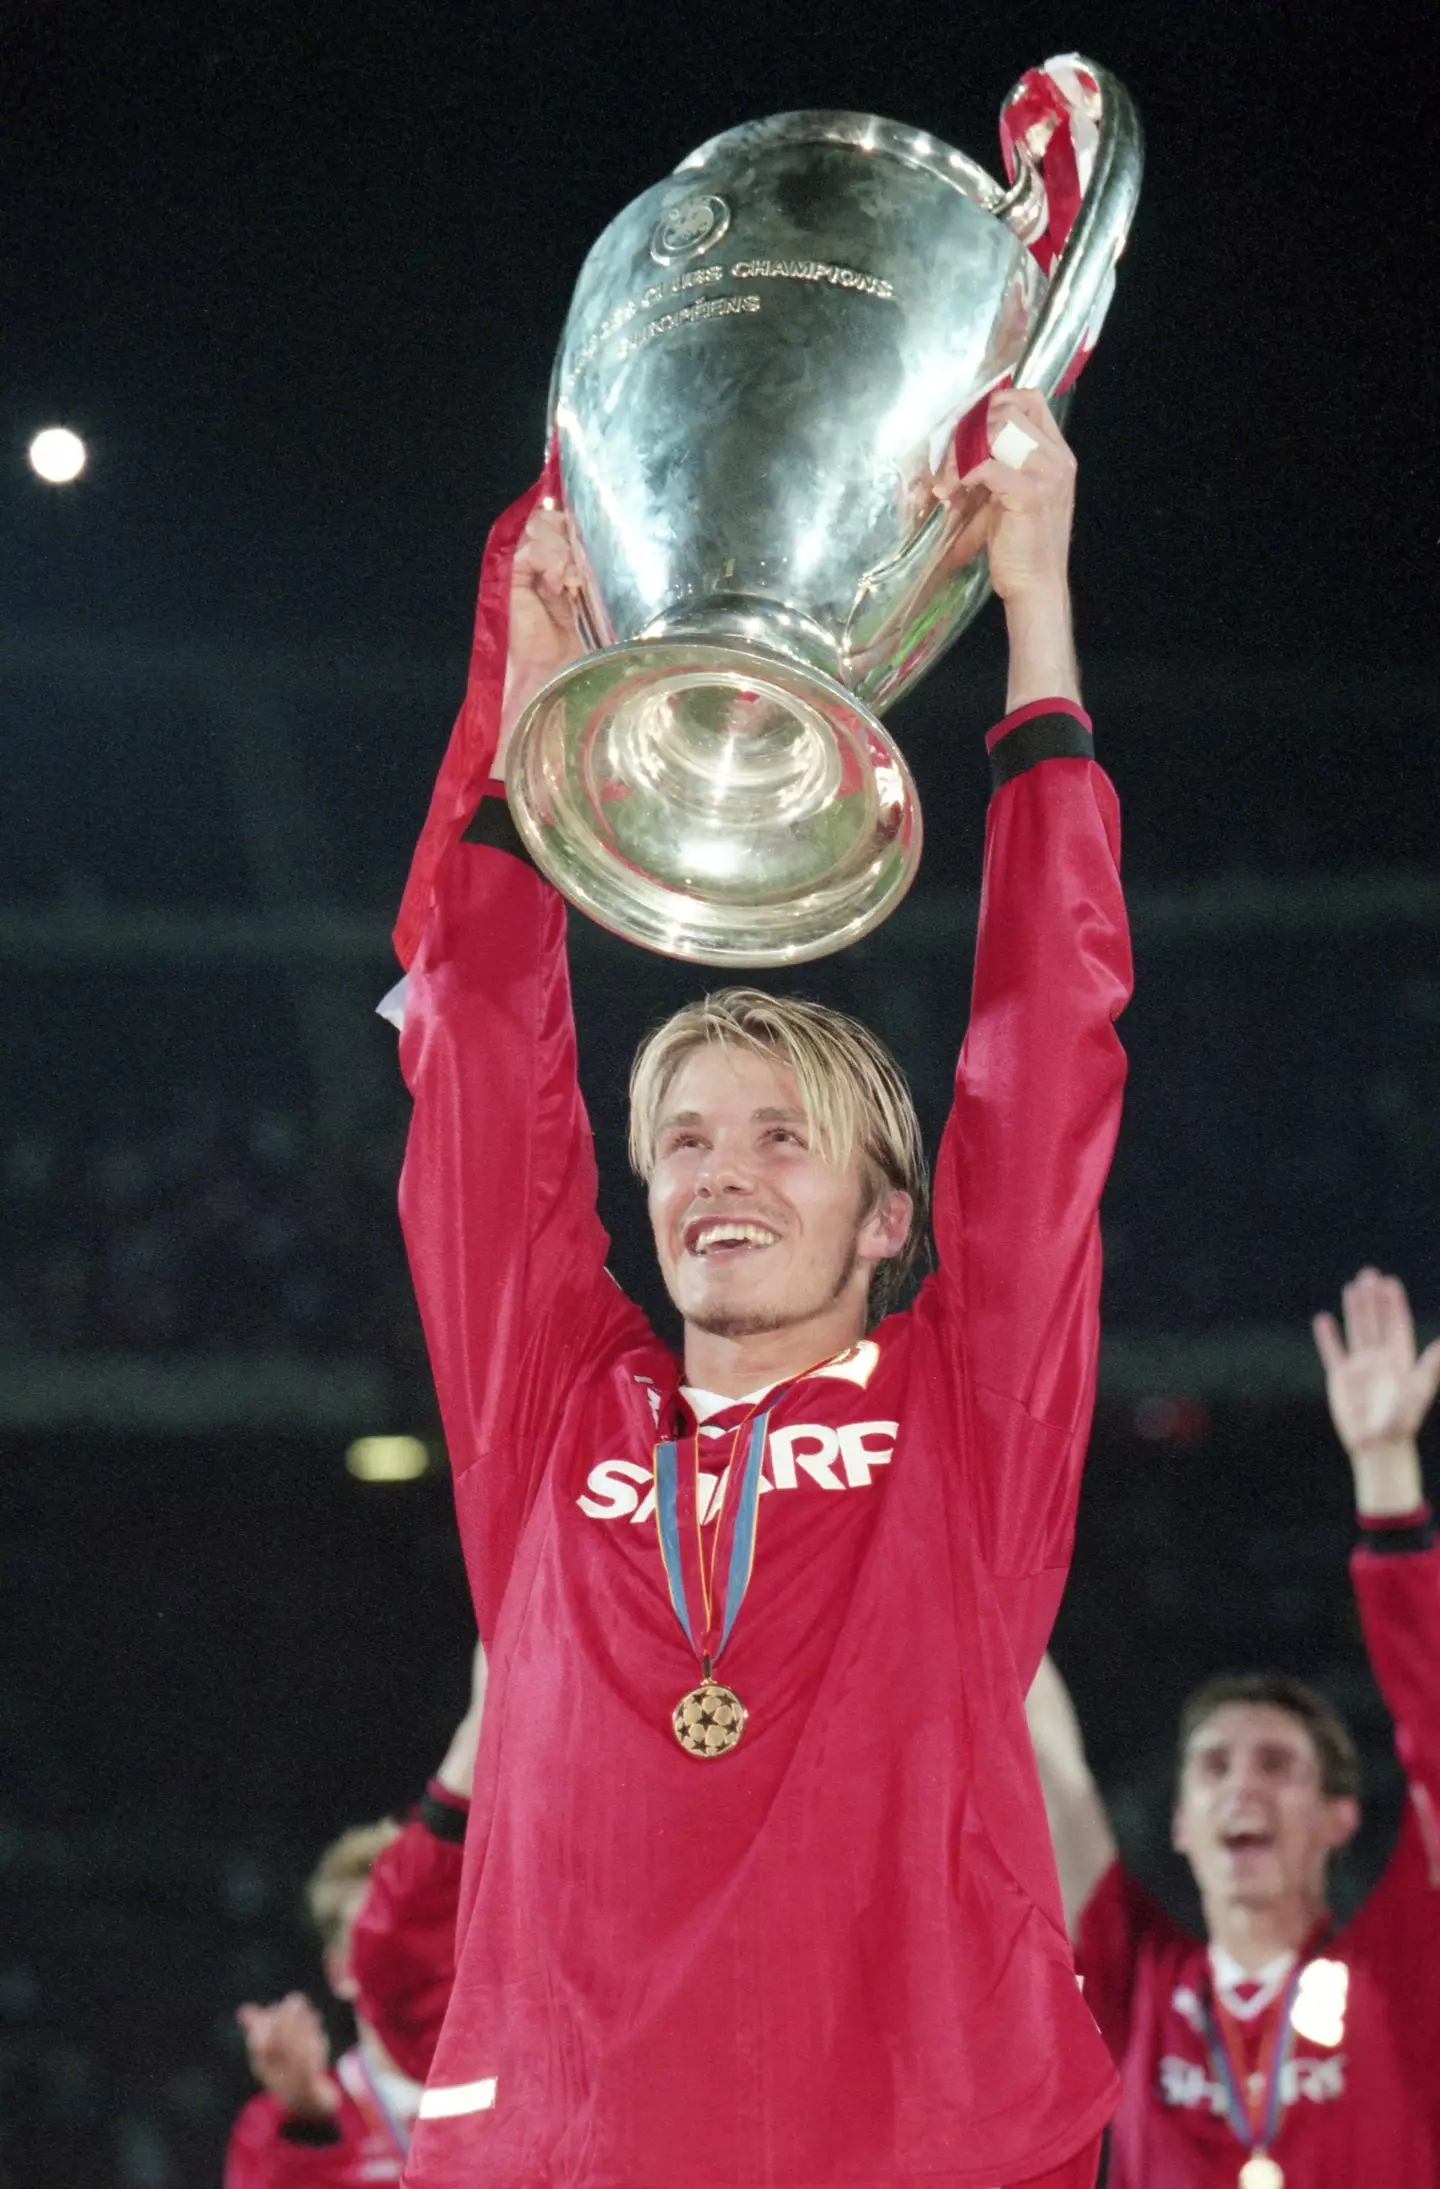 David Beckham with the Champions League trophy in 1999. (Alamy)